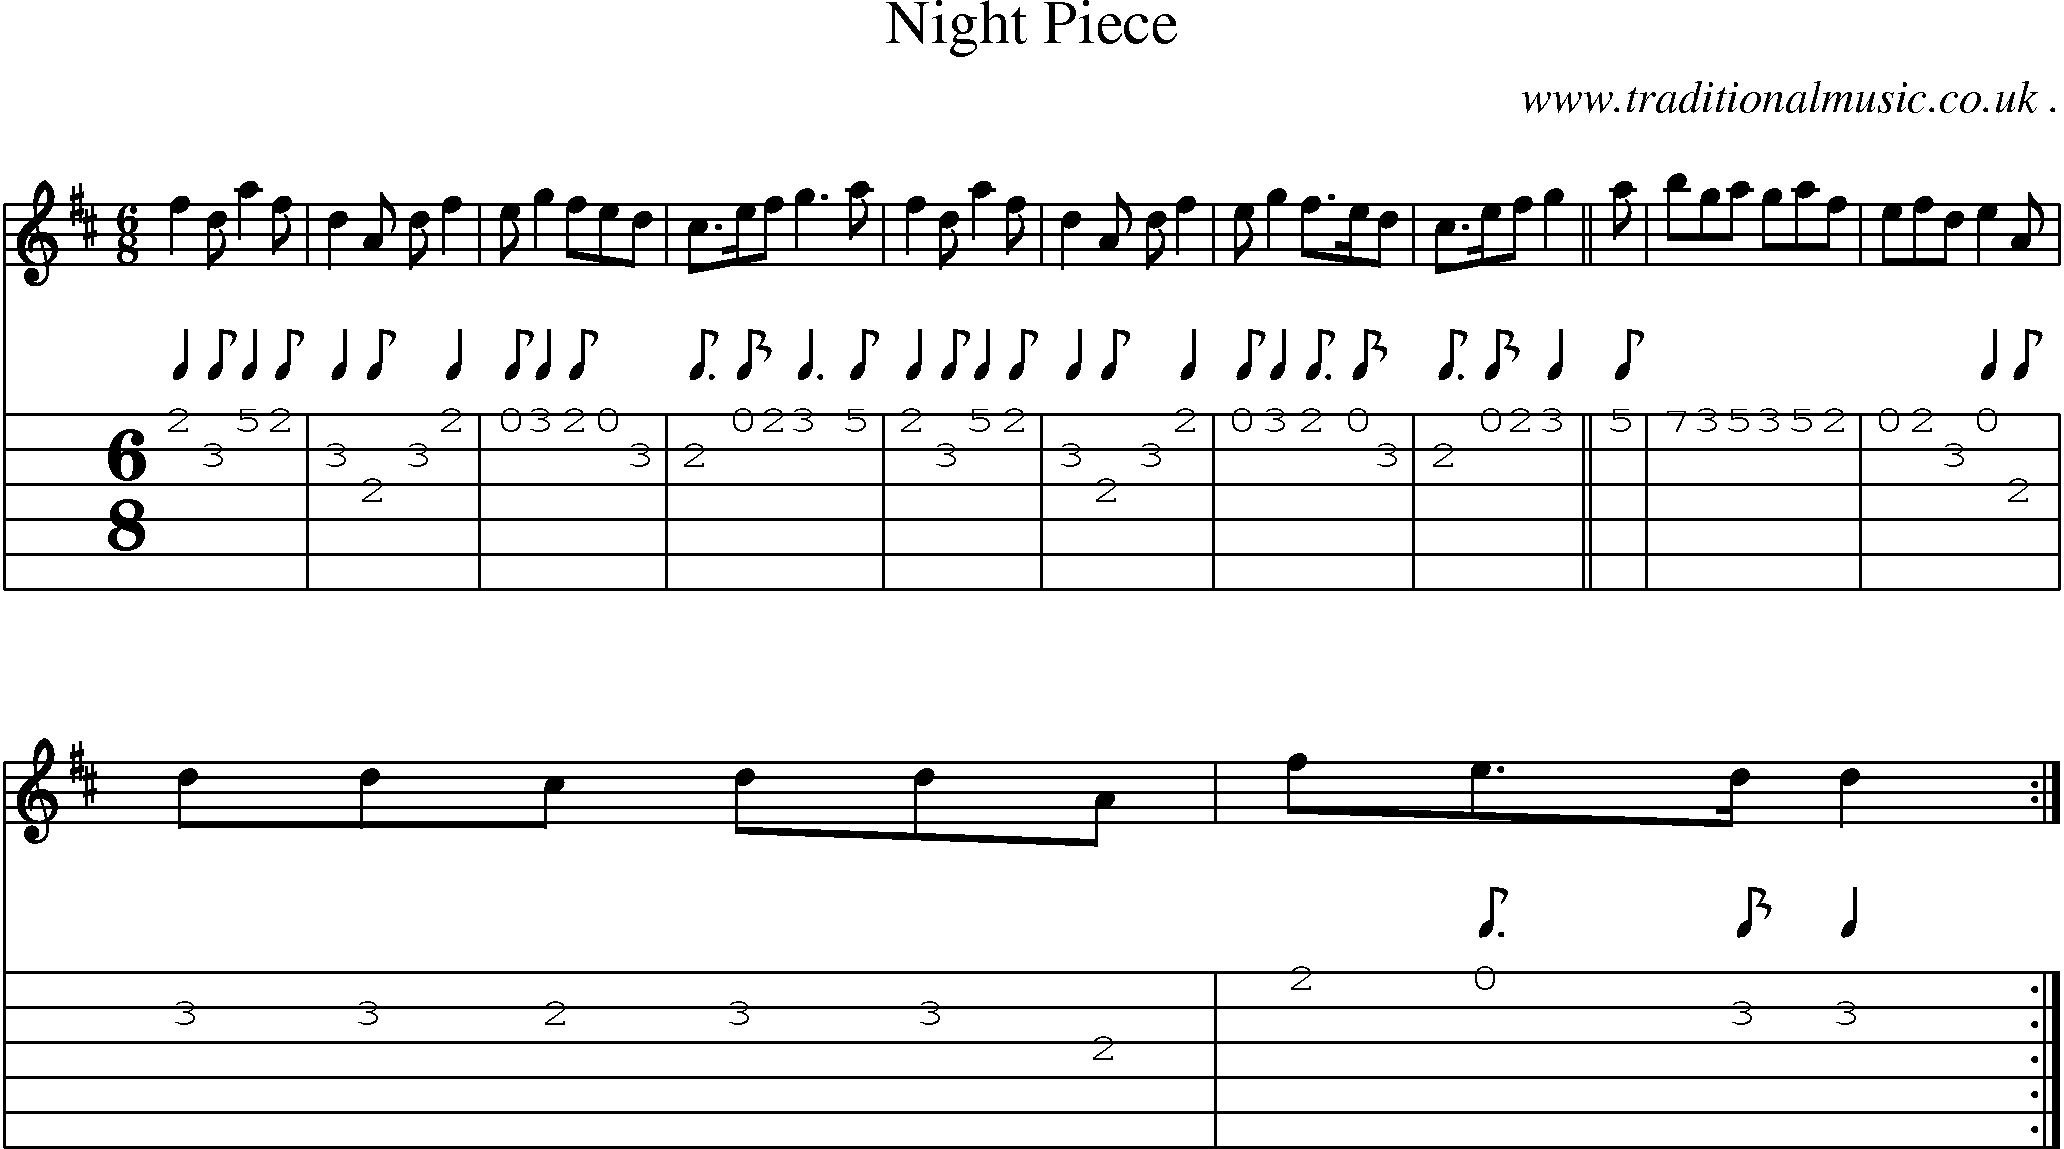 Sheet-Music and Guitar Tabs for Night Piece